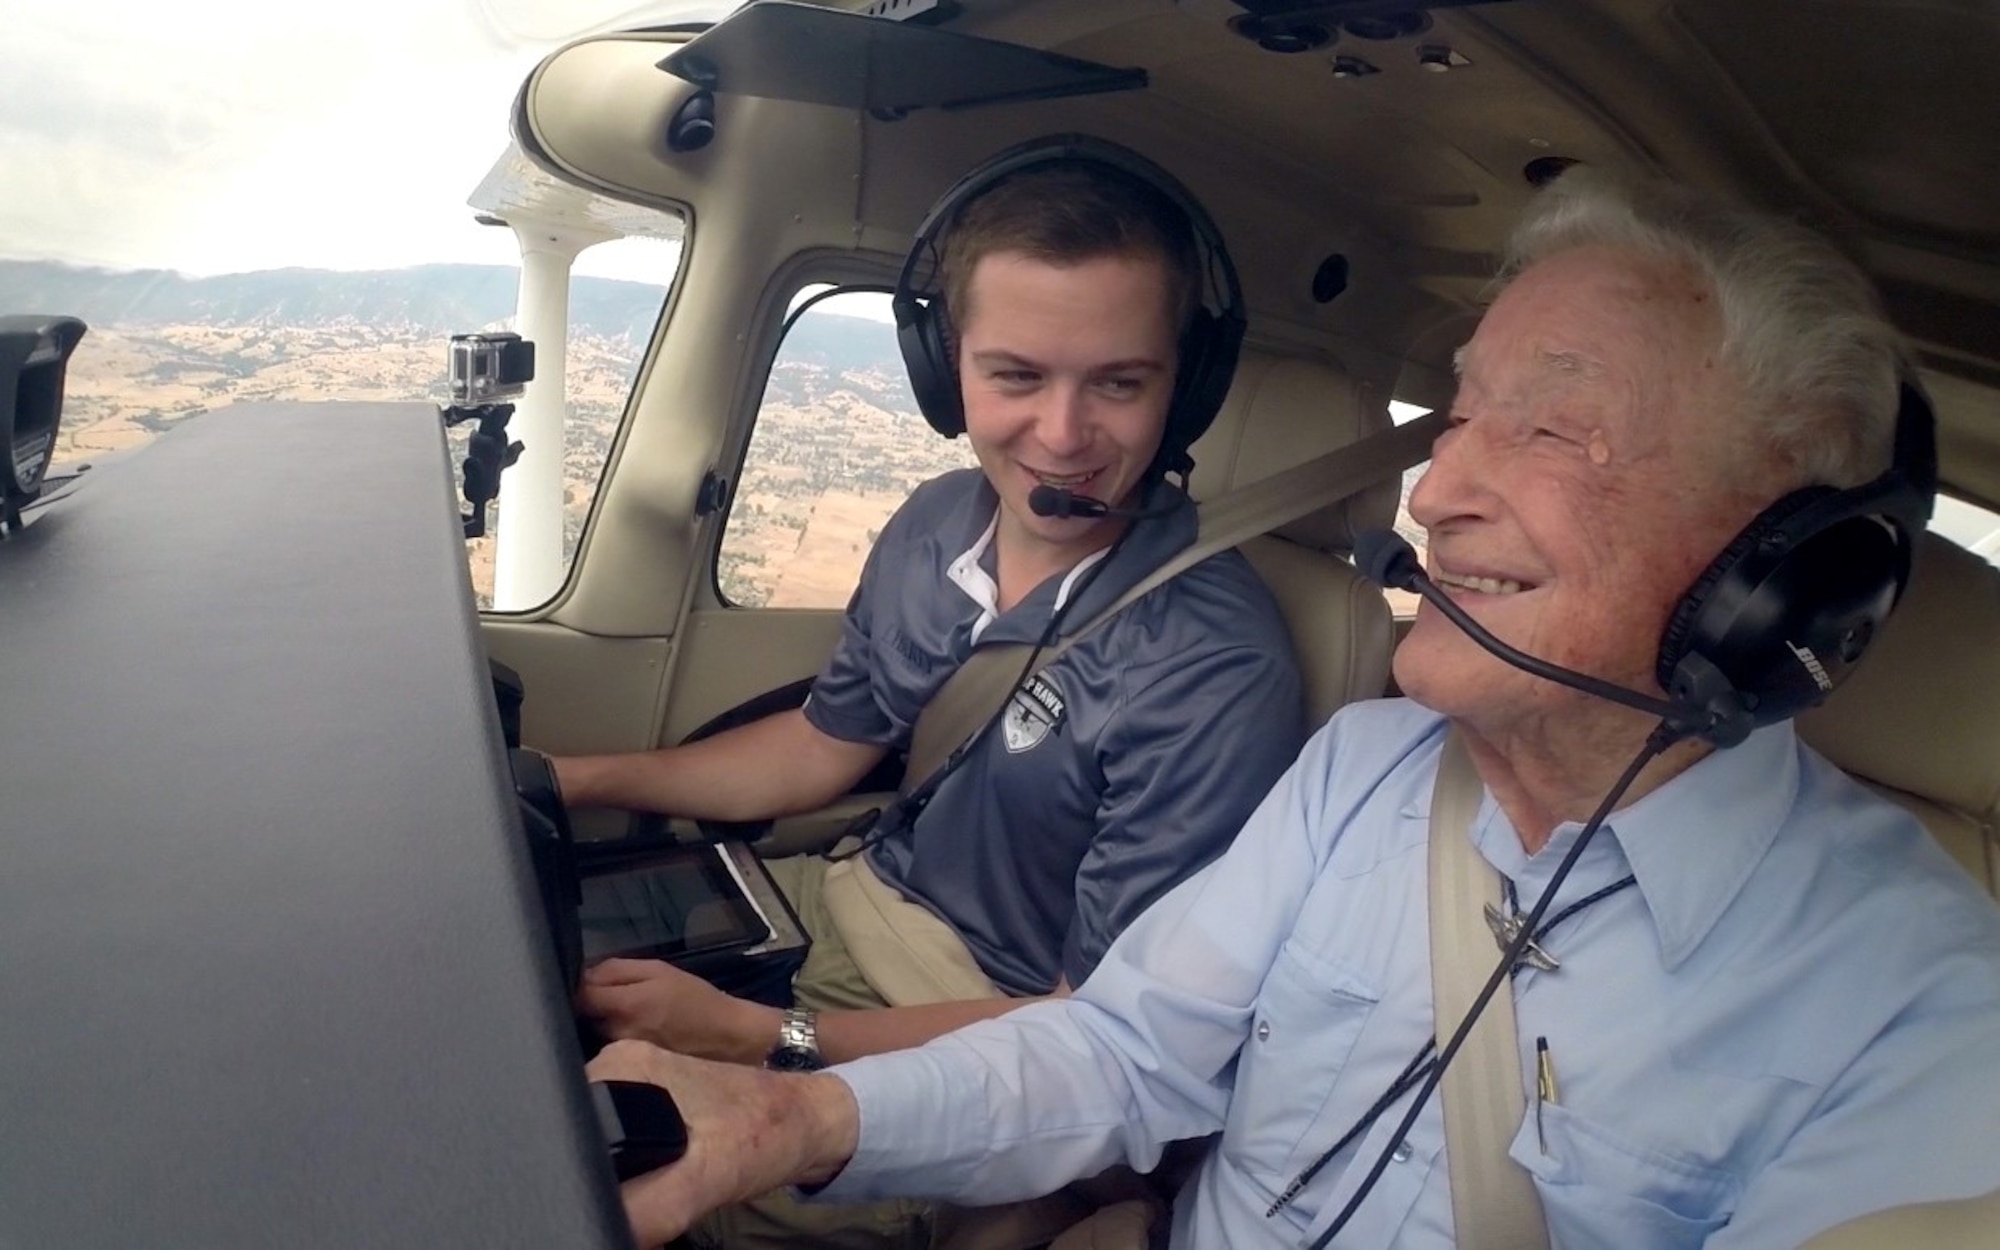 Ret. Lt. Col. Bruce Sooy receives a demonstration July 2015 flight at Nut Tree airport by Liberty University. It had been 56 years since he had last flown an aircraft, which was 1959. (Courtesy photo)